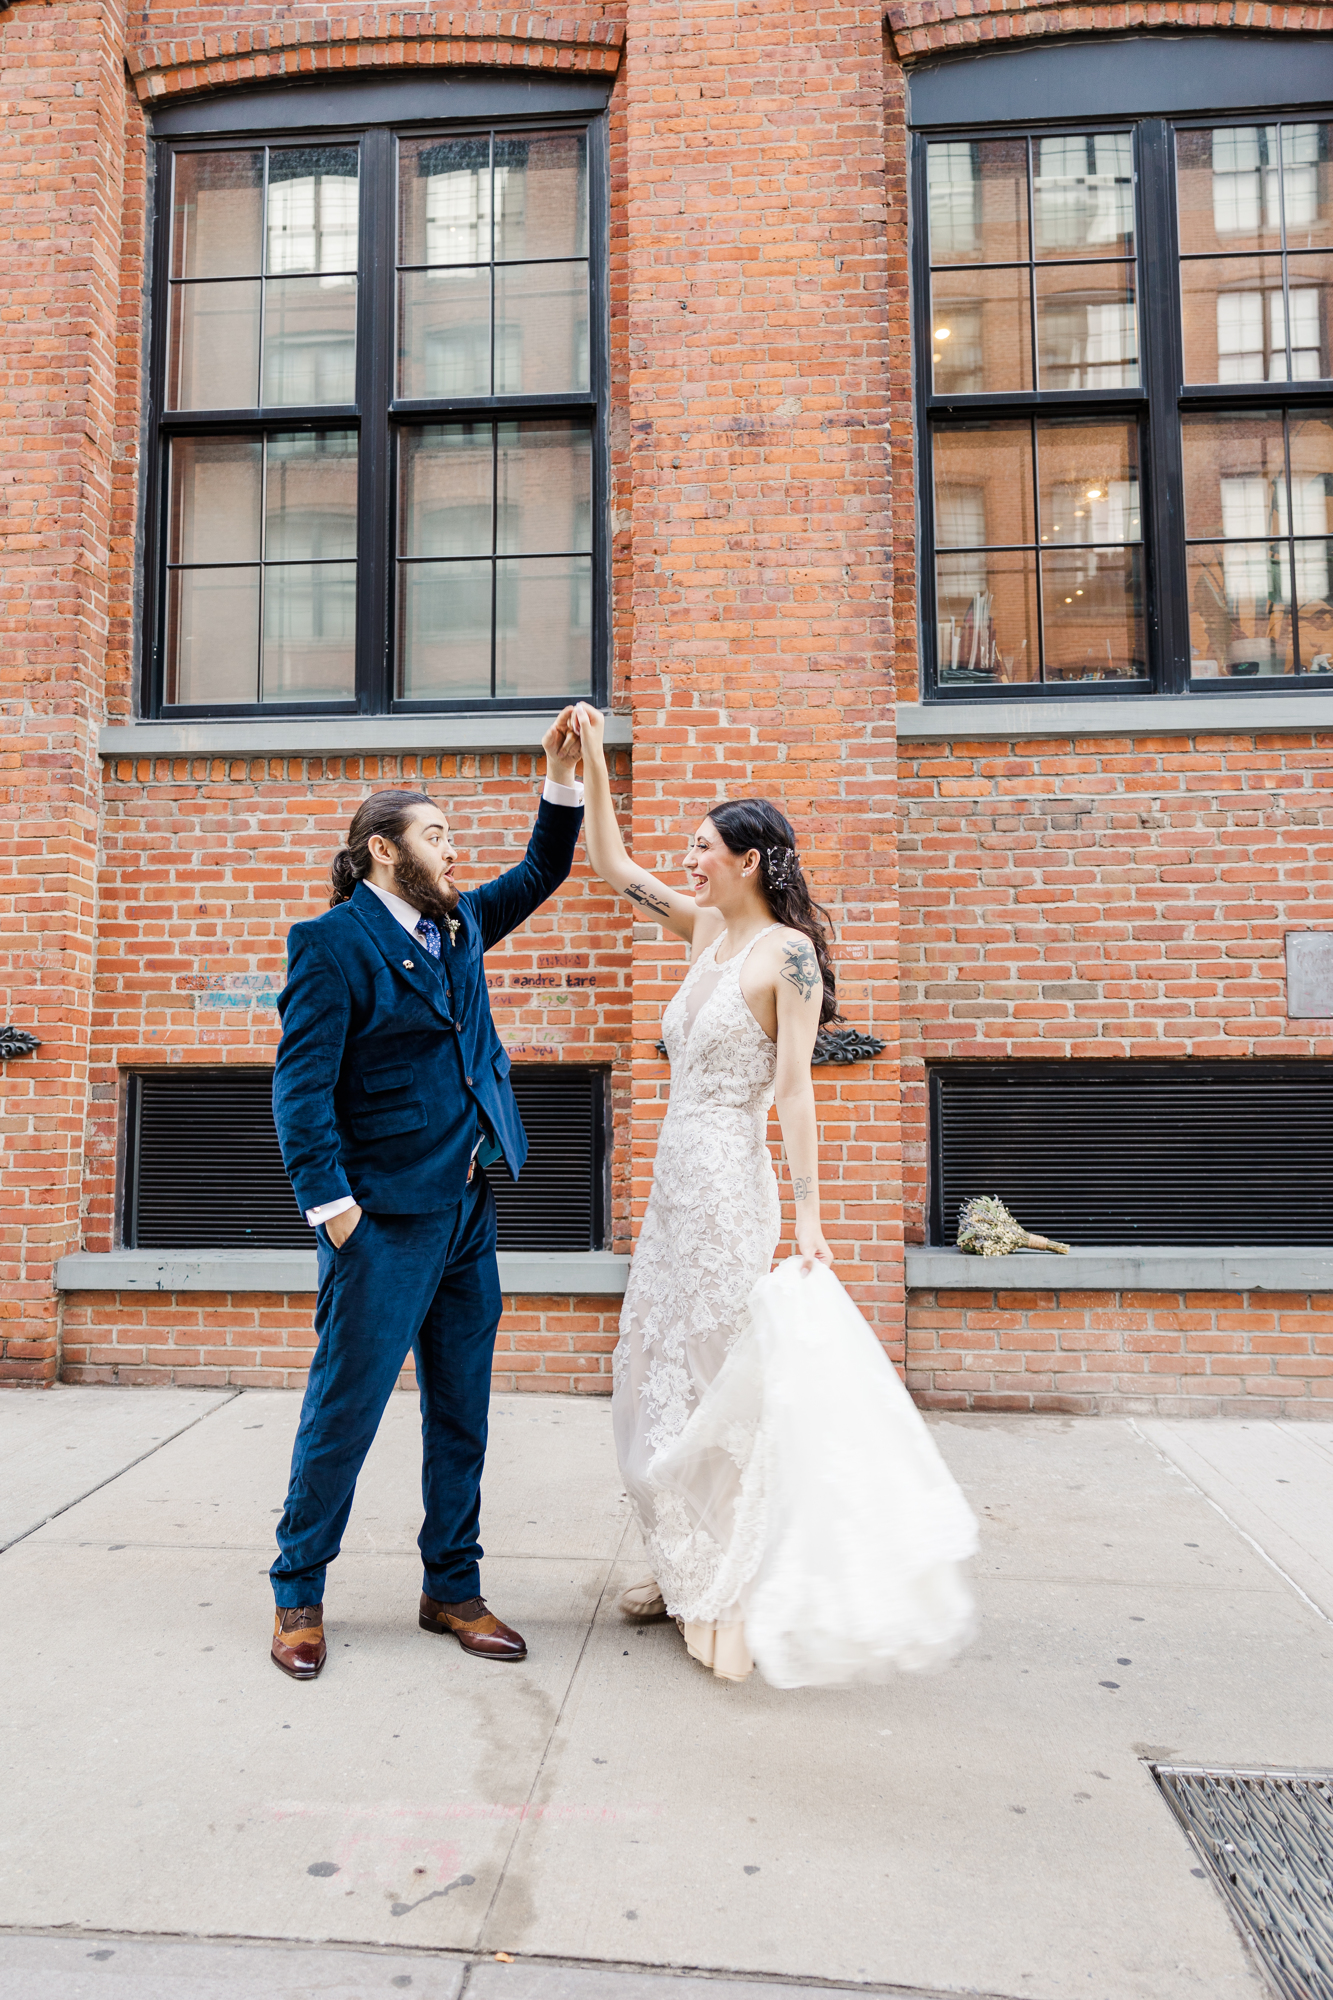 Best Restaurants to Eat at After a Special DUMBO Elopement